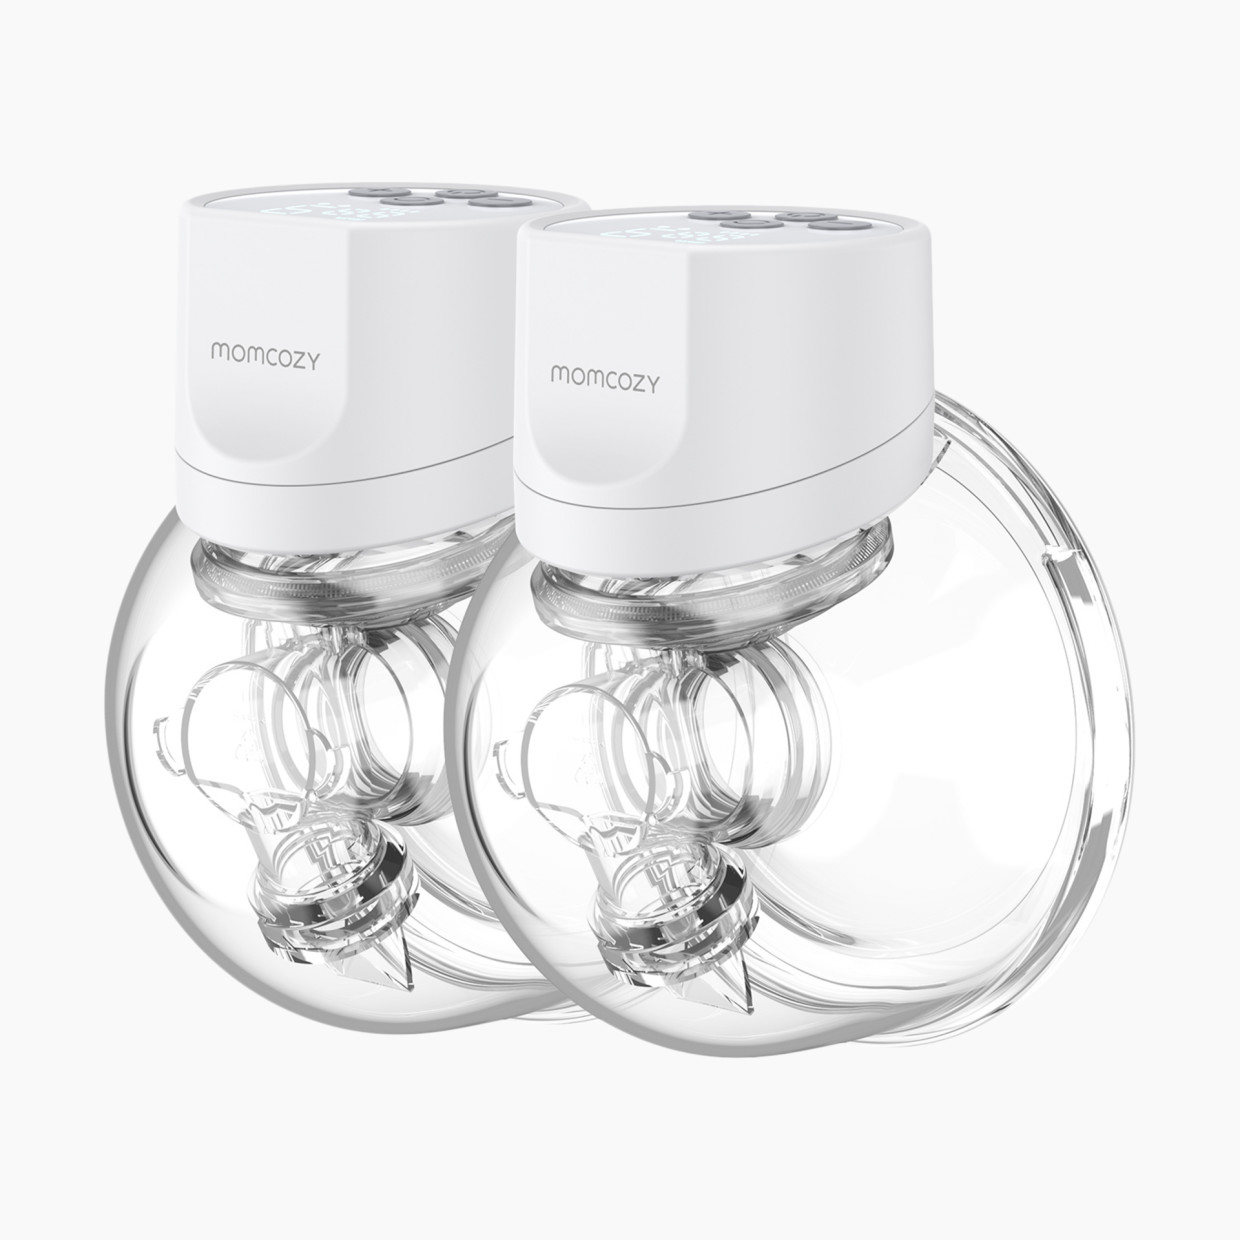  Momcozy Breast Pump S12 Pro Hands-Free, Wearable